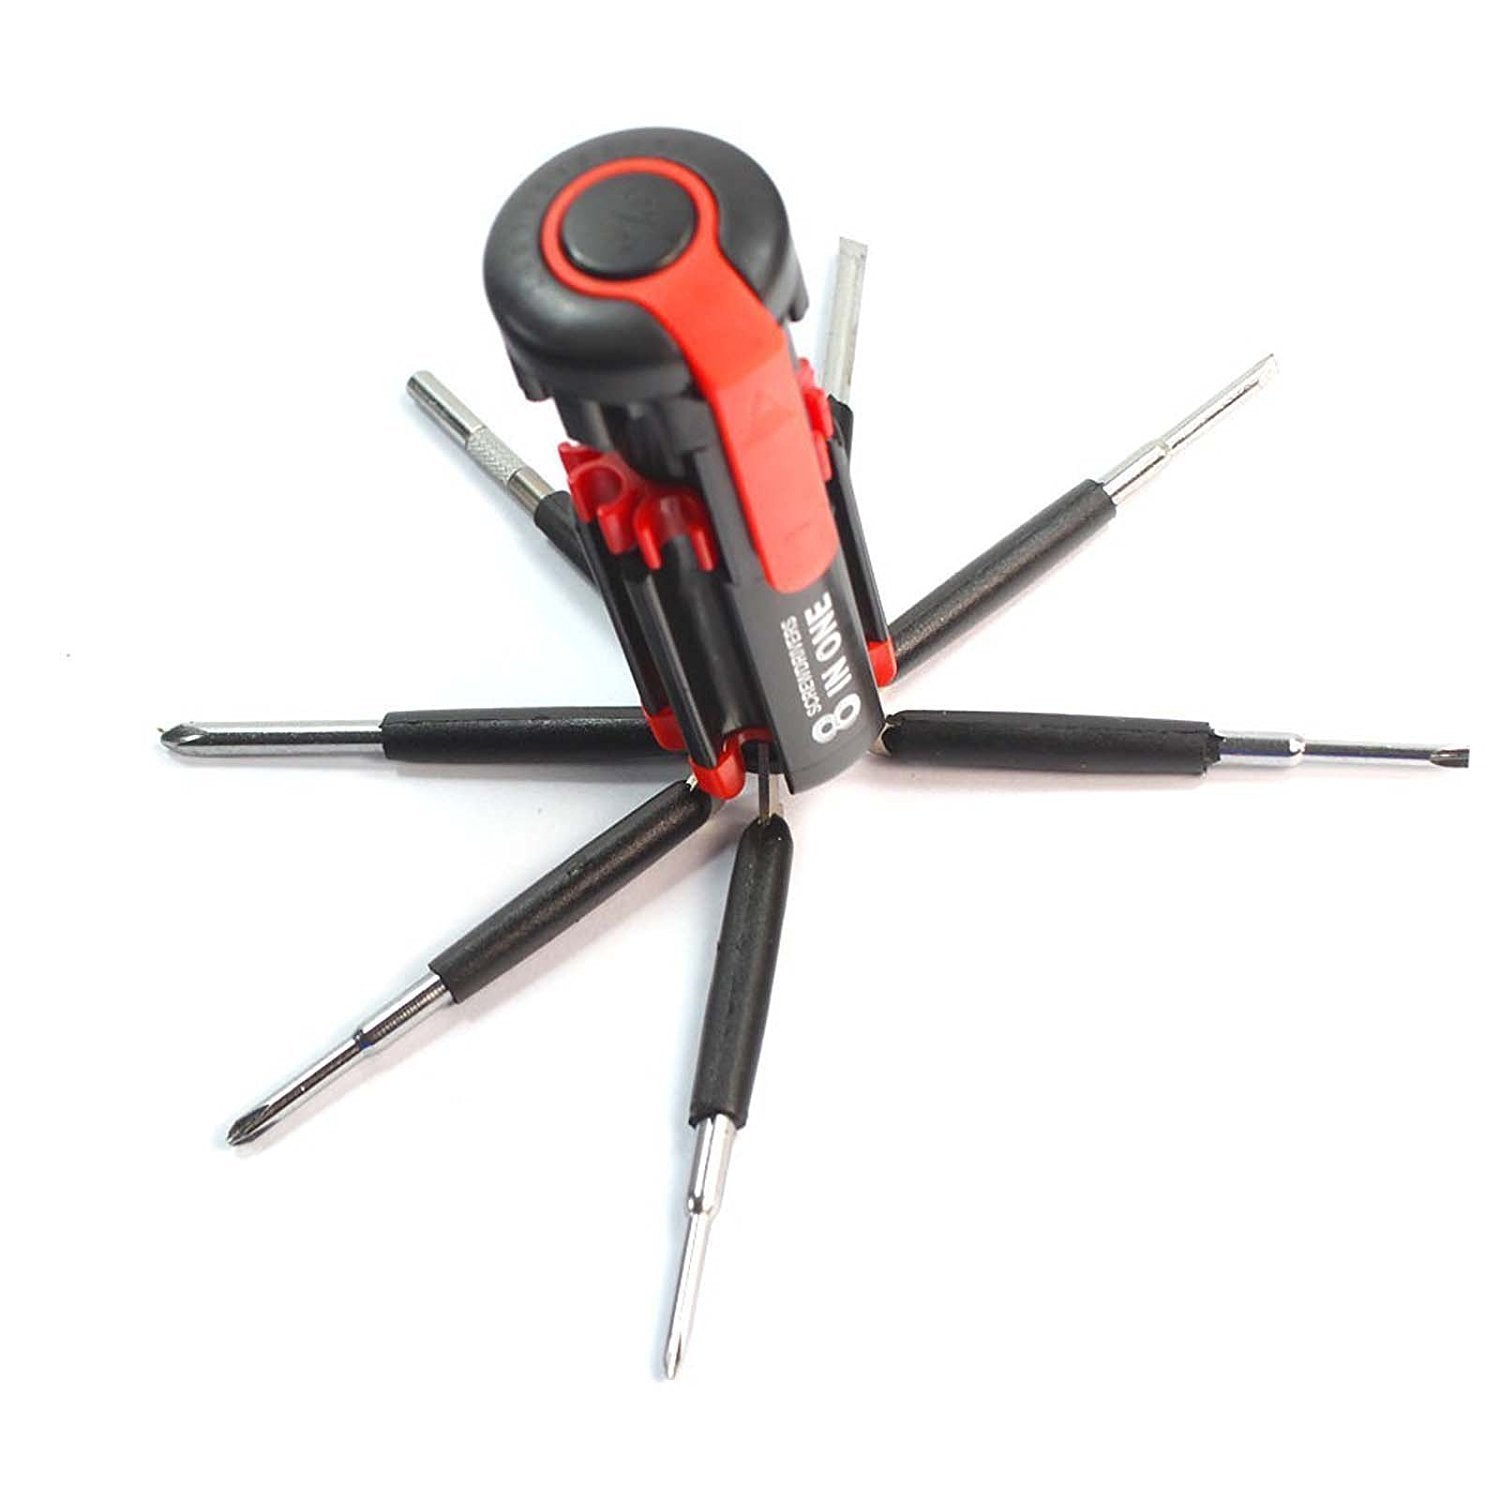 8 in 1 Multi-Function Screwdriver Kit with LED Portable Torch 